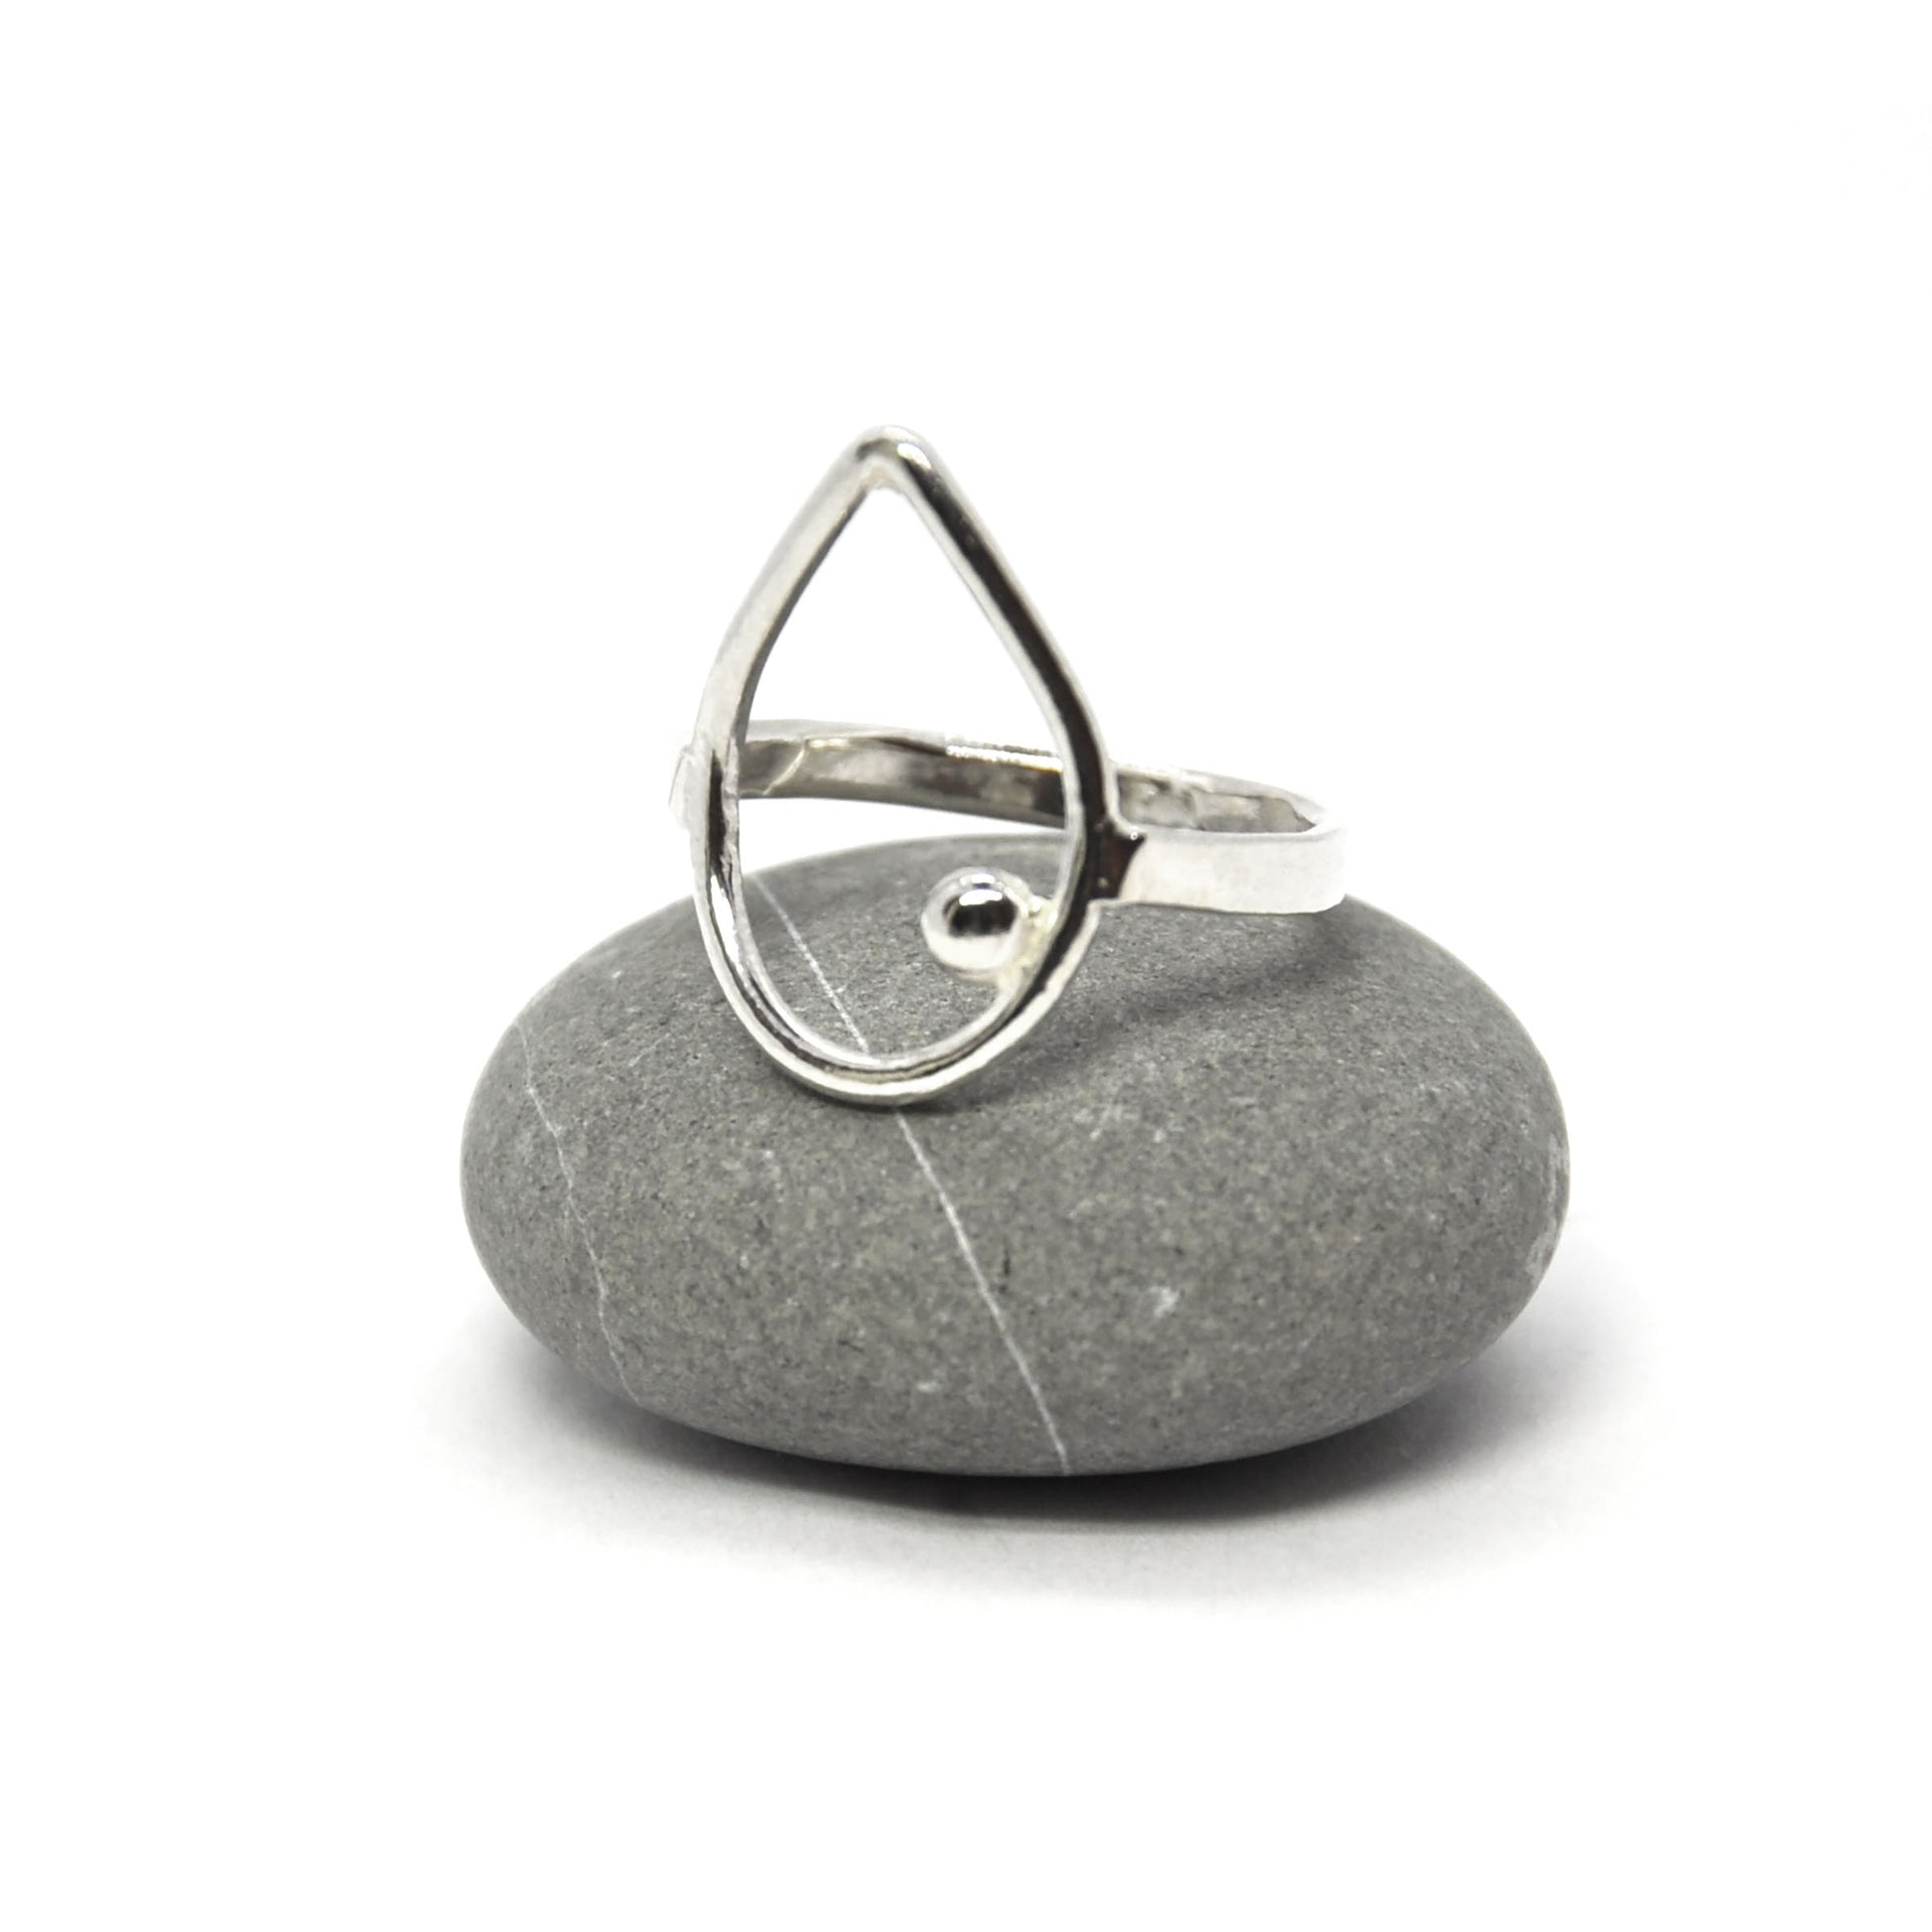 Silver open teardrop shaped ring with off-centre ball. Pictured on a pebble.